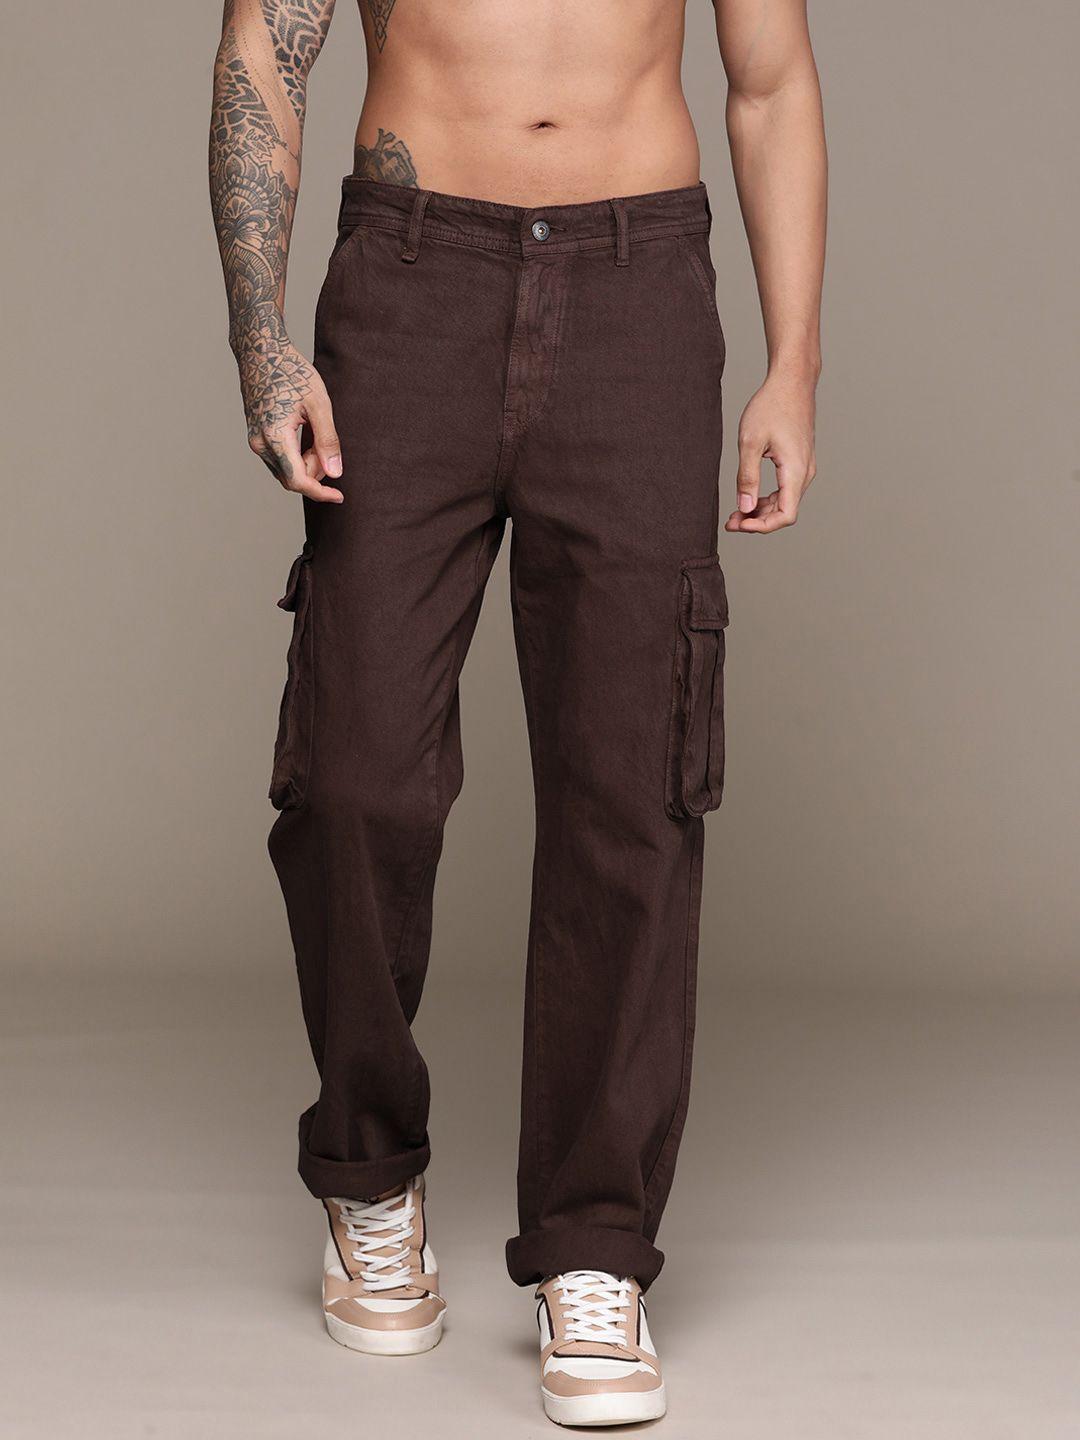 the roadster lifestyle co. men straight fit cargo jeans